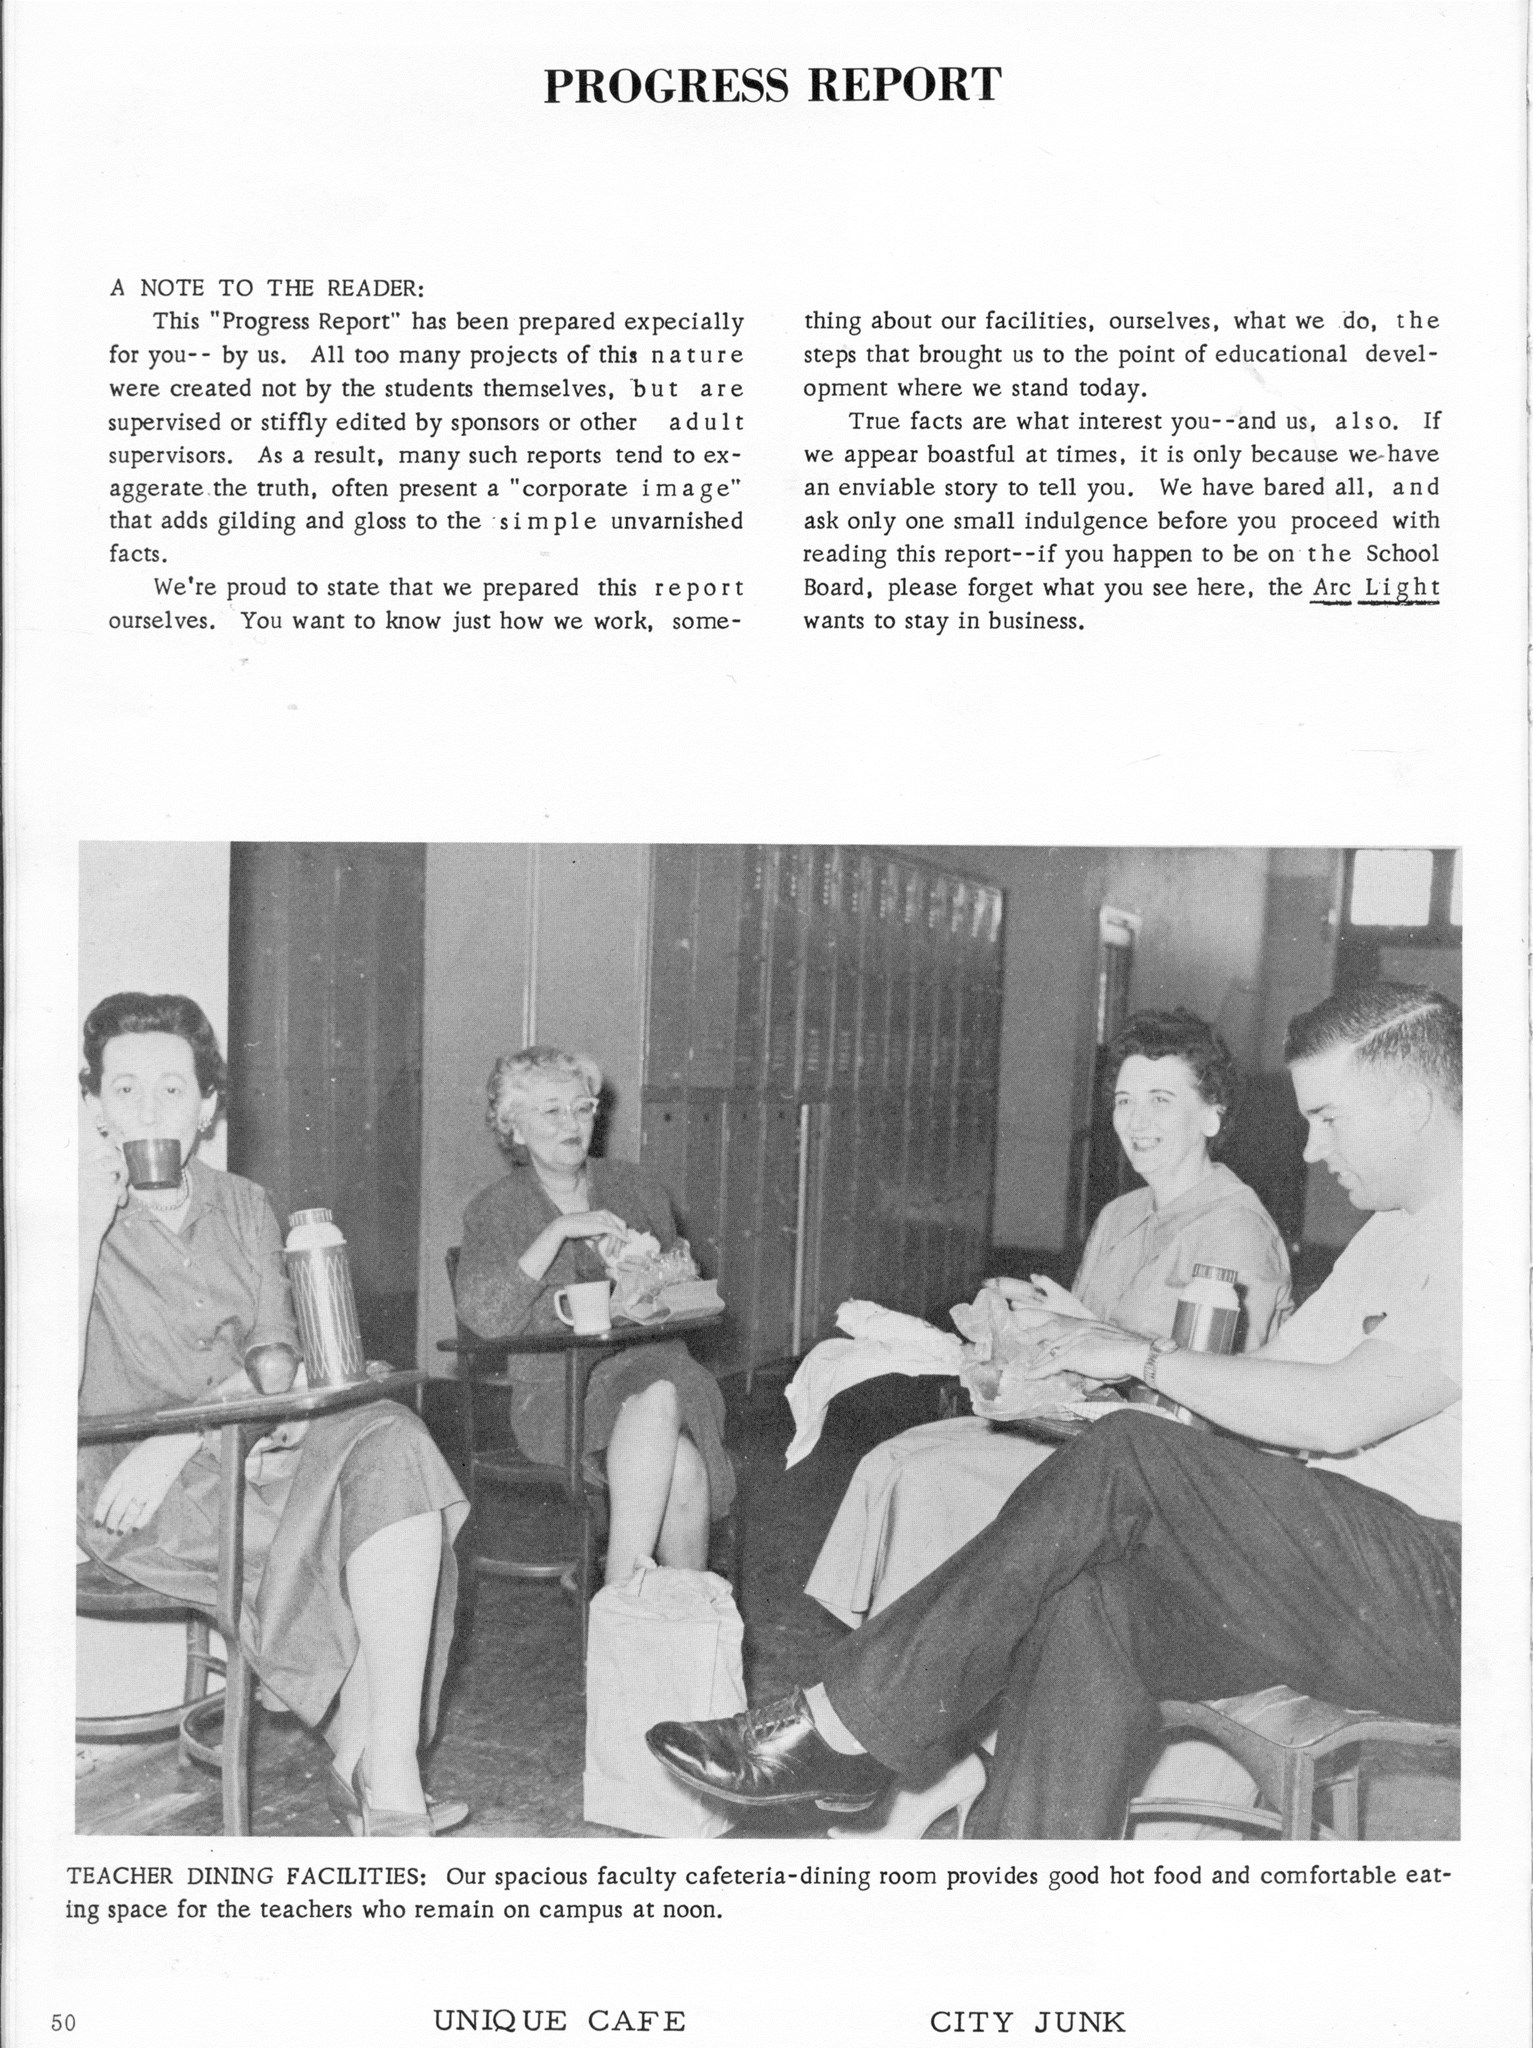 ../../../Images/Large/1961/Arclight-1961-pg0050.jpg